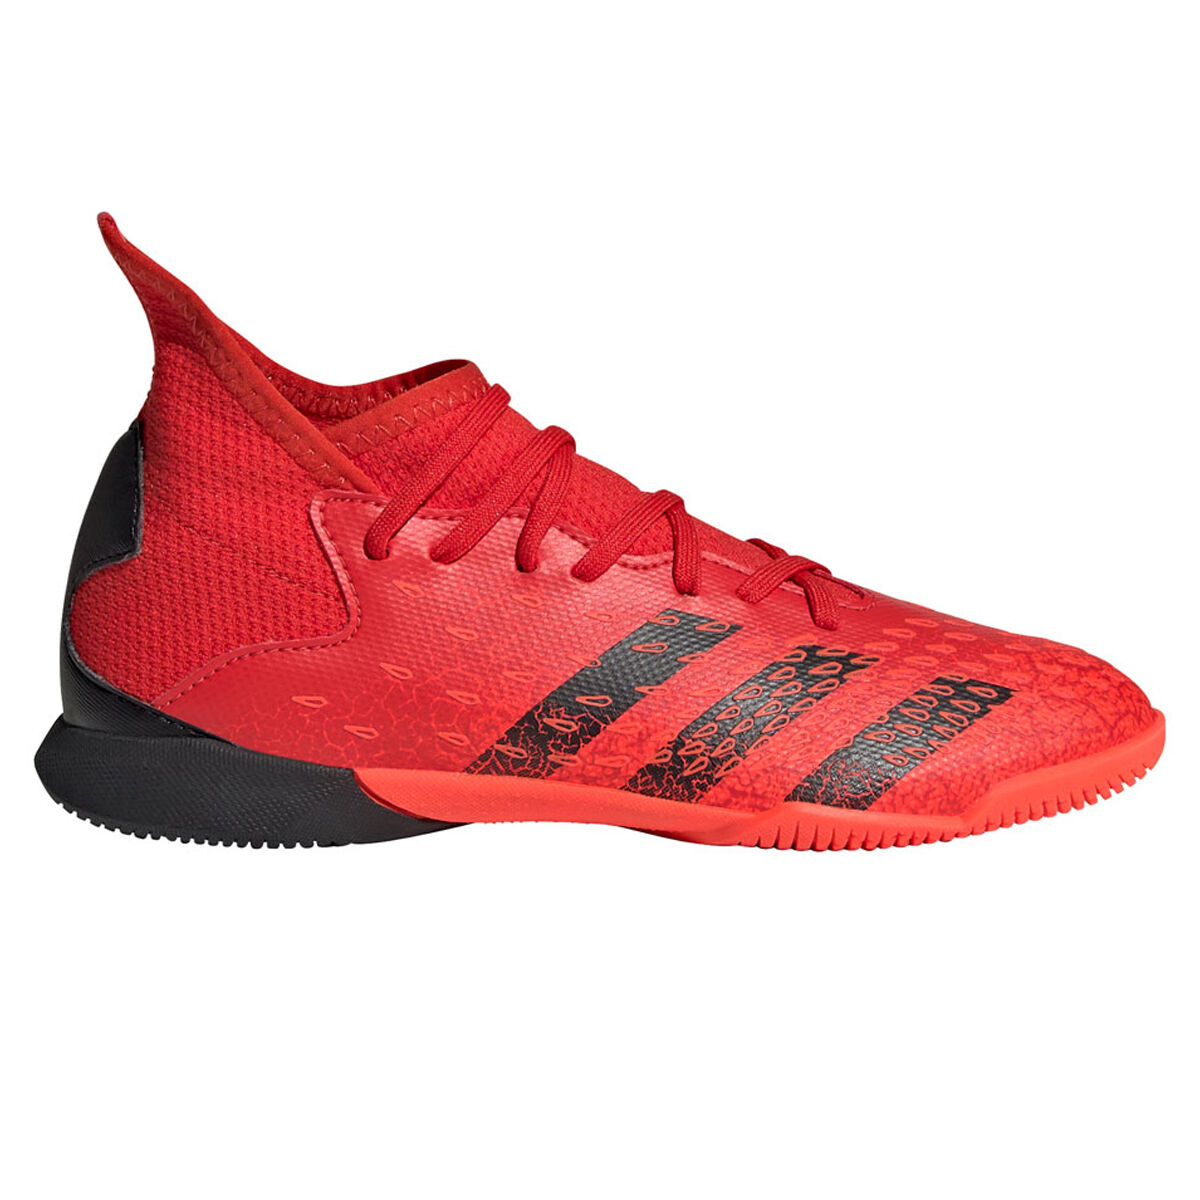 Buy adidas Unisex-Adult Goletto VIII Turf Soccer Shoe, Core  Black/White/Red, 8.5 at Amazon.in